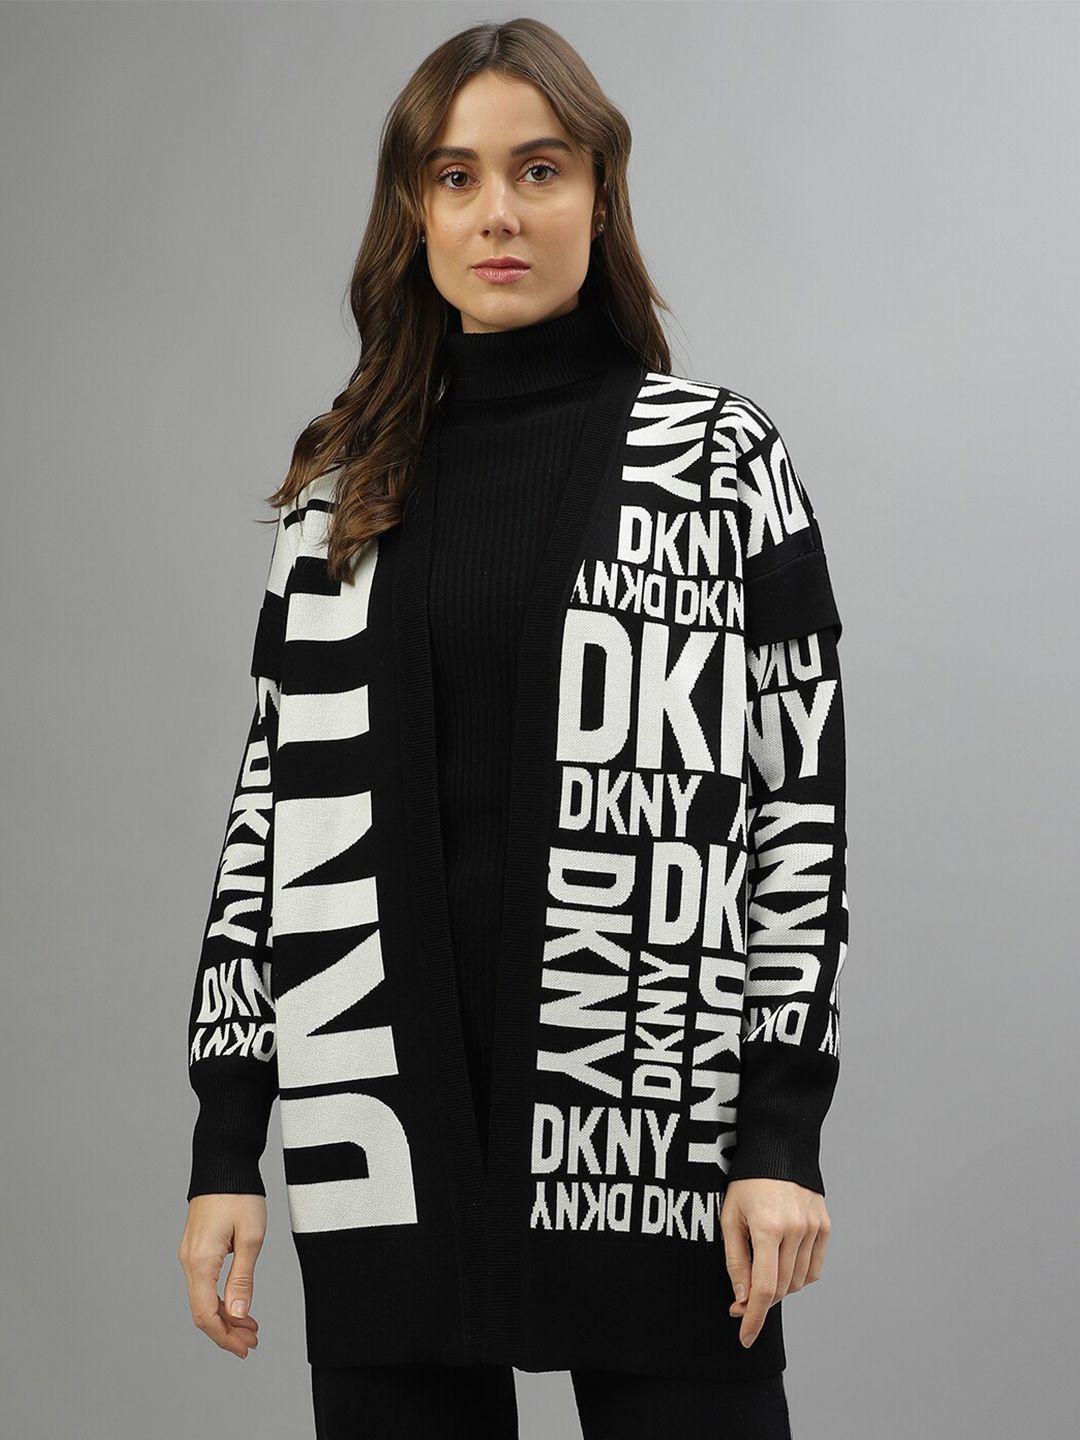 dkny typography printed front open sweater